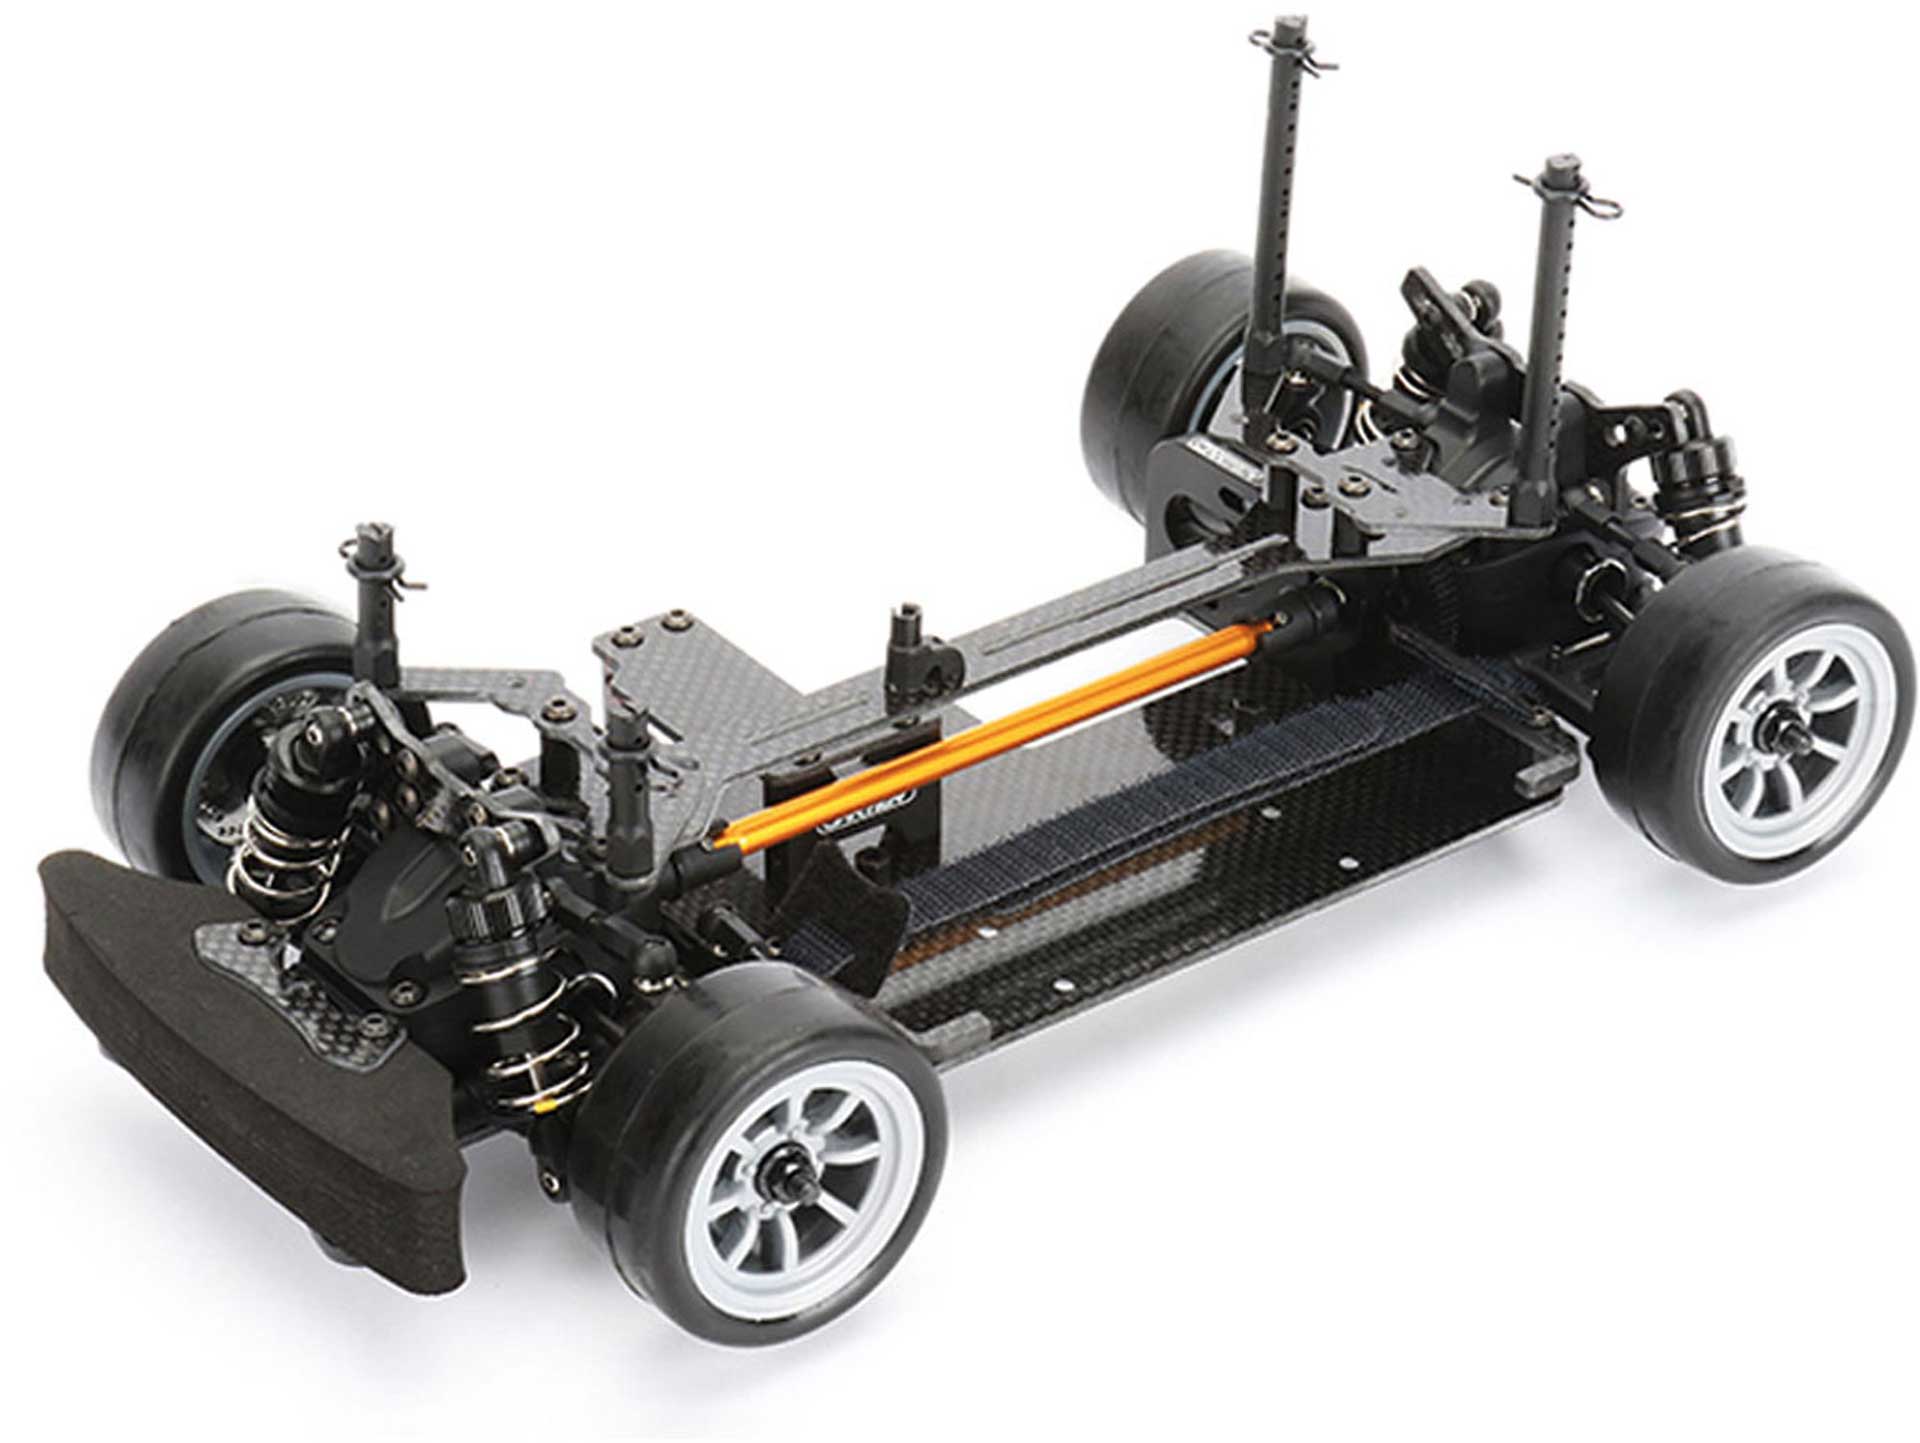 CARTEN M210 KIT 1/10 EP 4WD M-CHASSIS